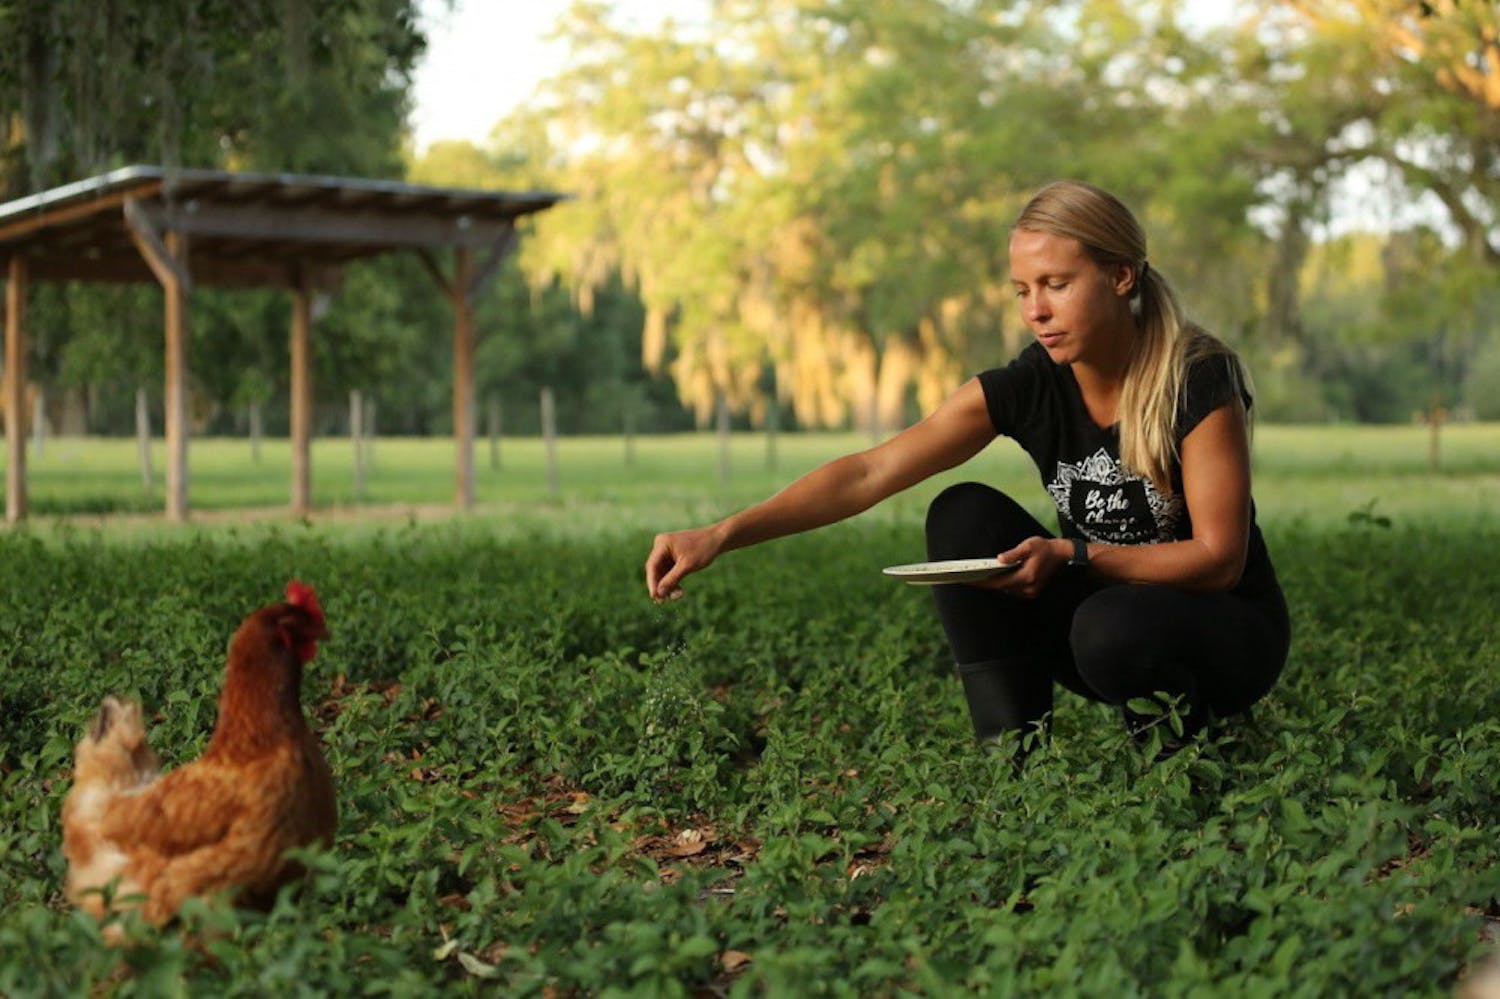 Emma Hoel, co-founder of Peacefield, feeding Bernadette, one of the chickens living at Peacefield.